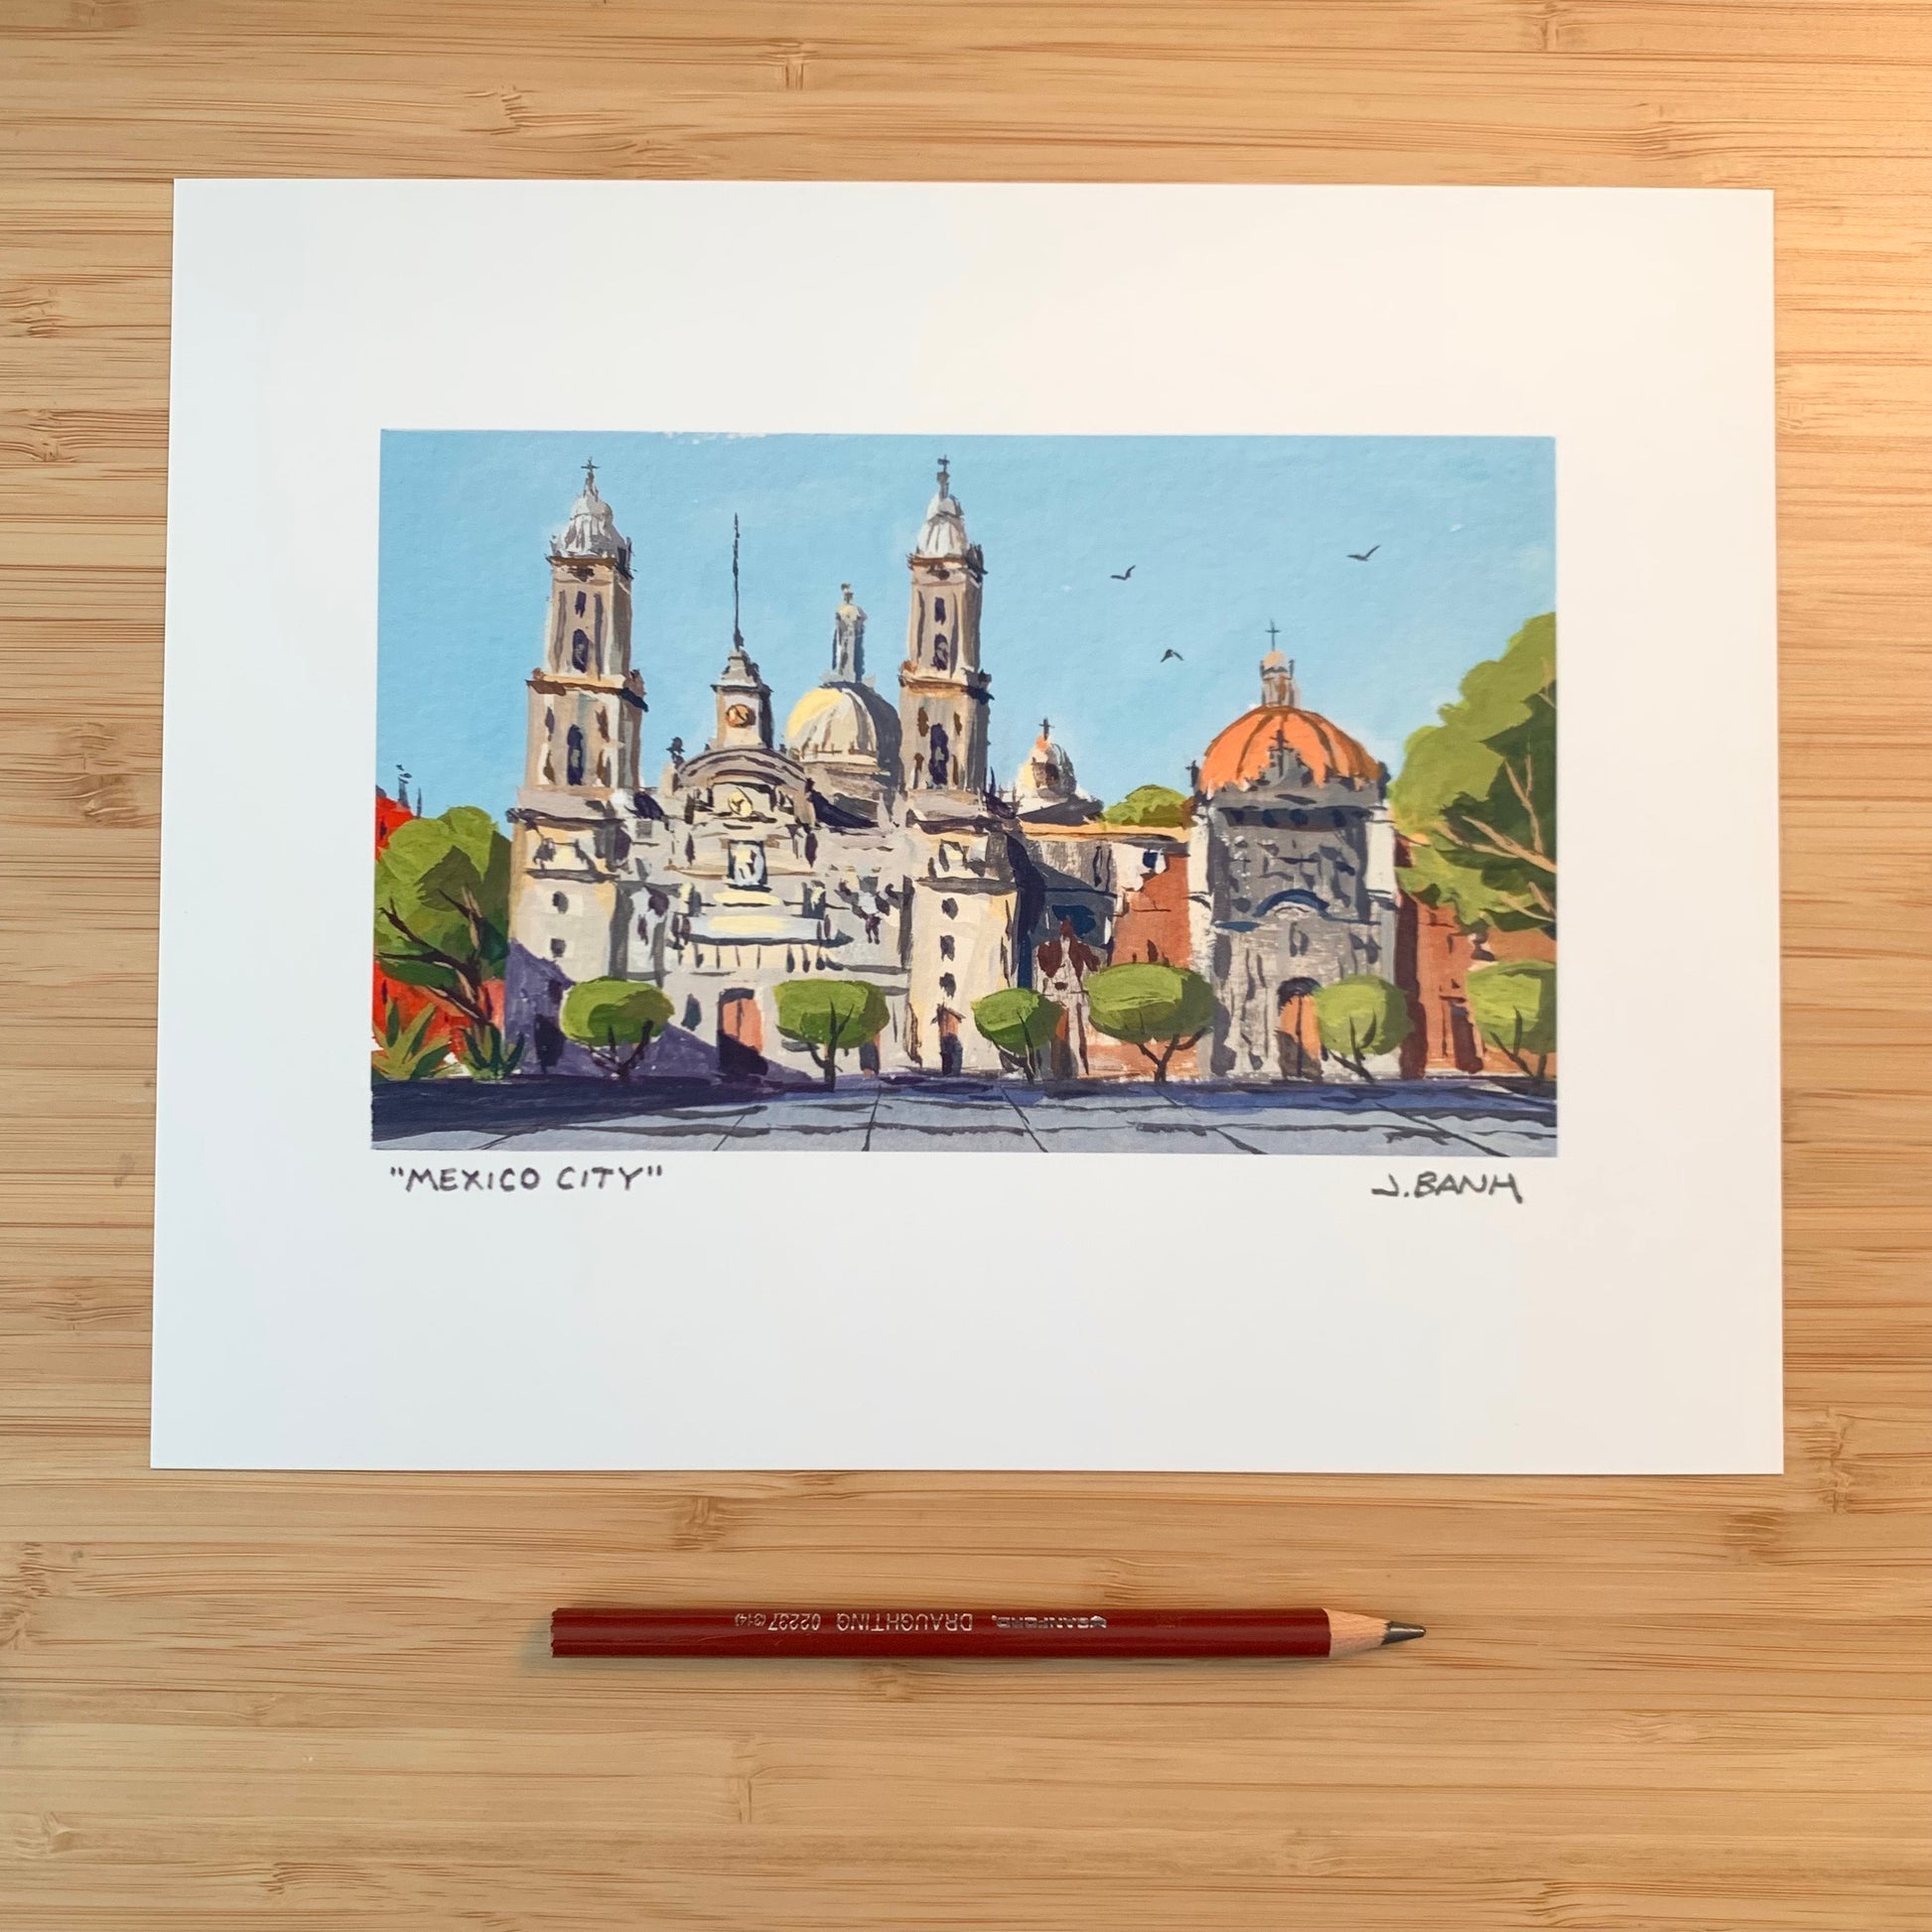 8 x 10 art print of a painting of a cathedral in mexico city